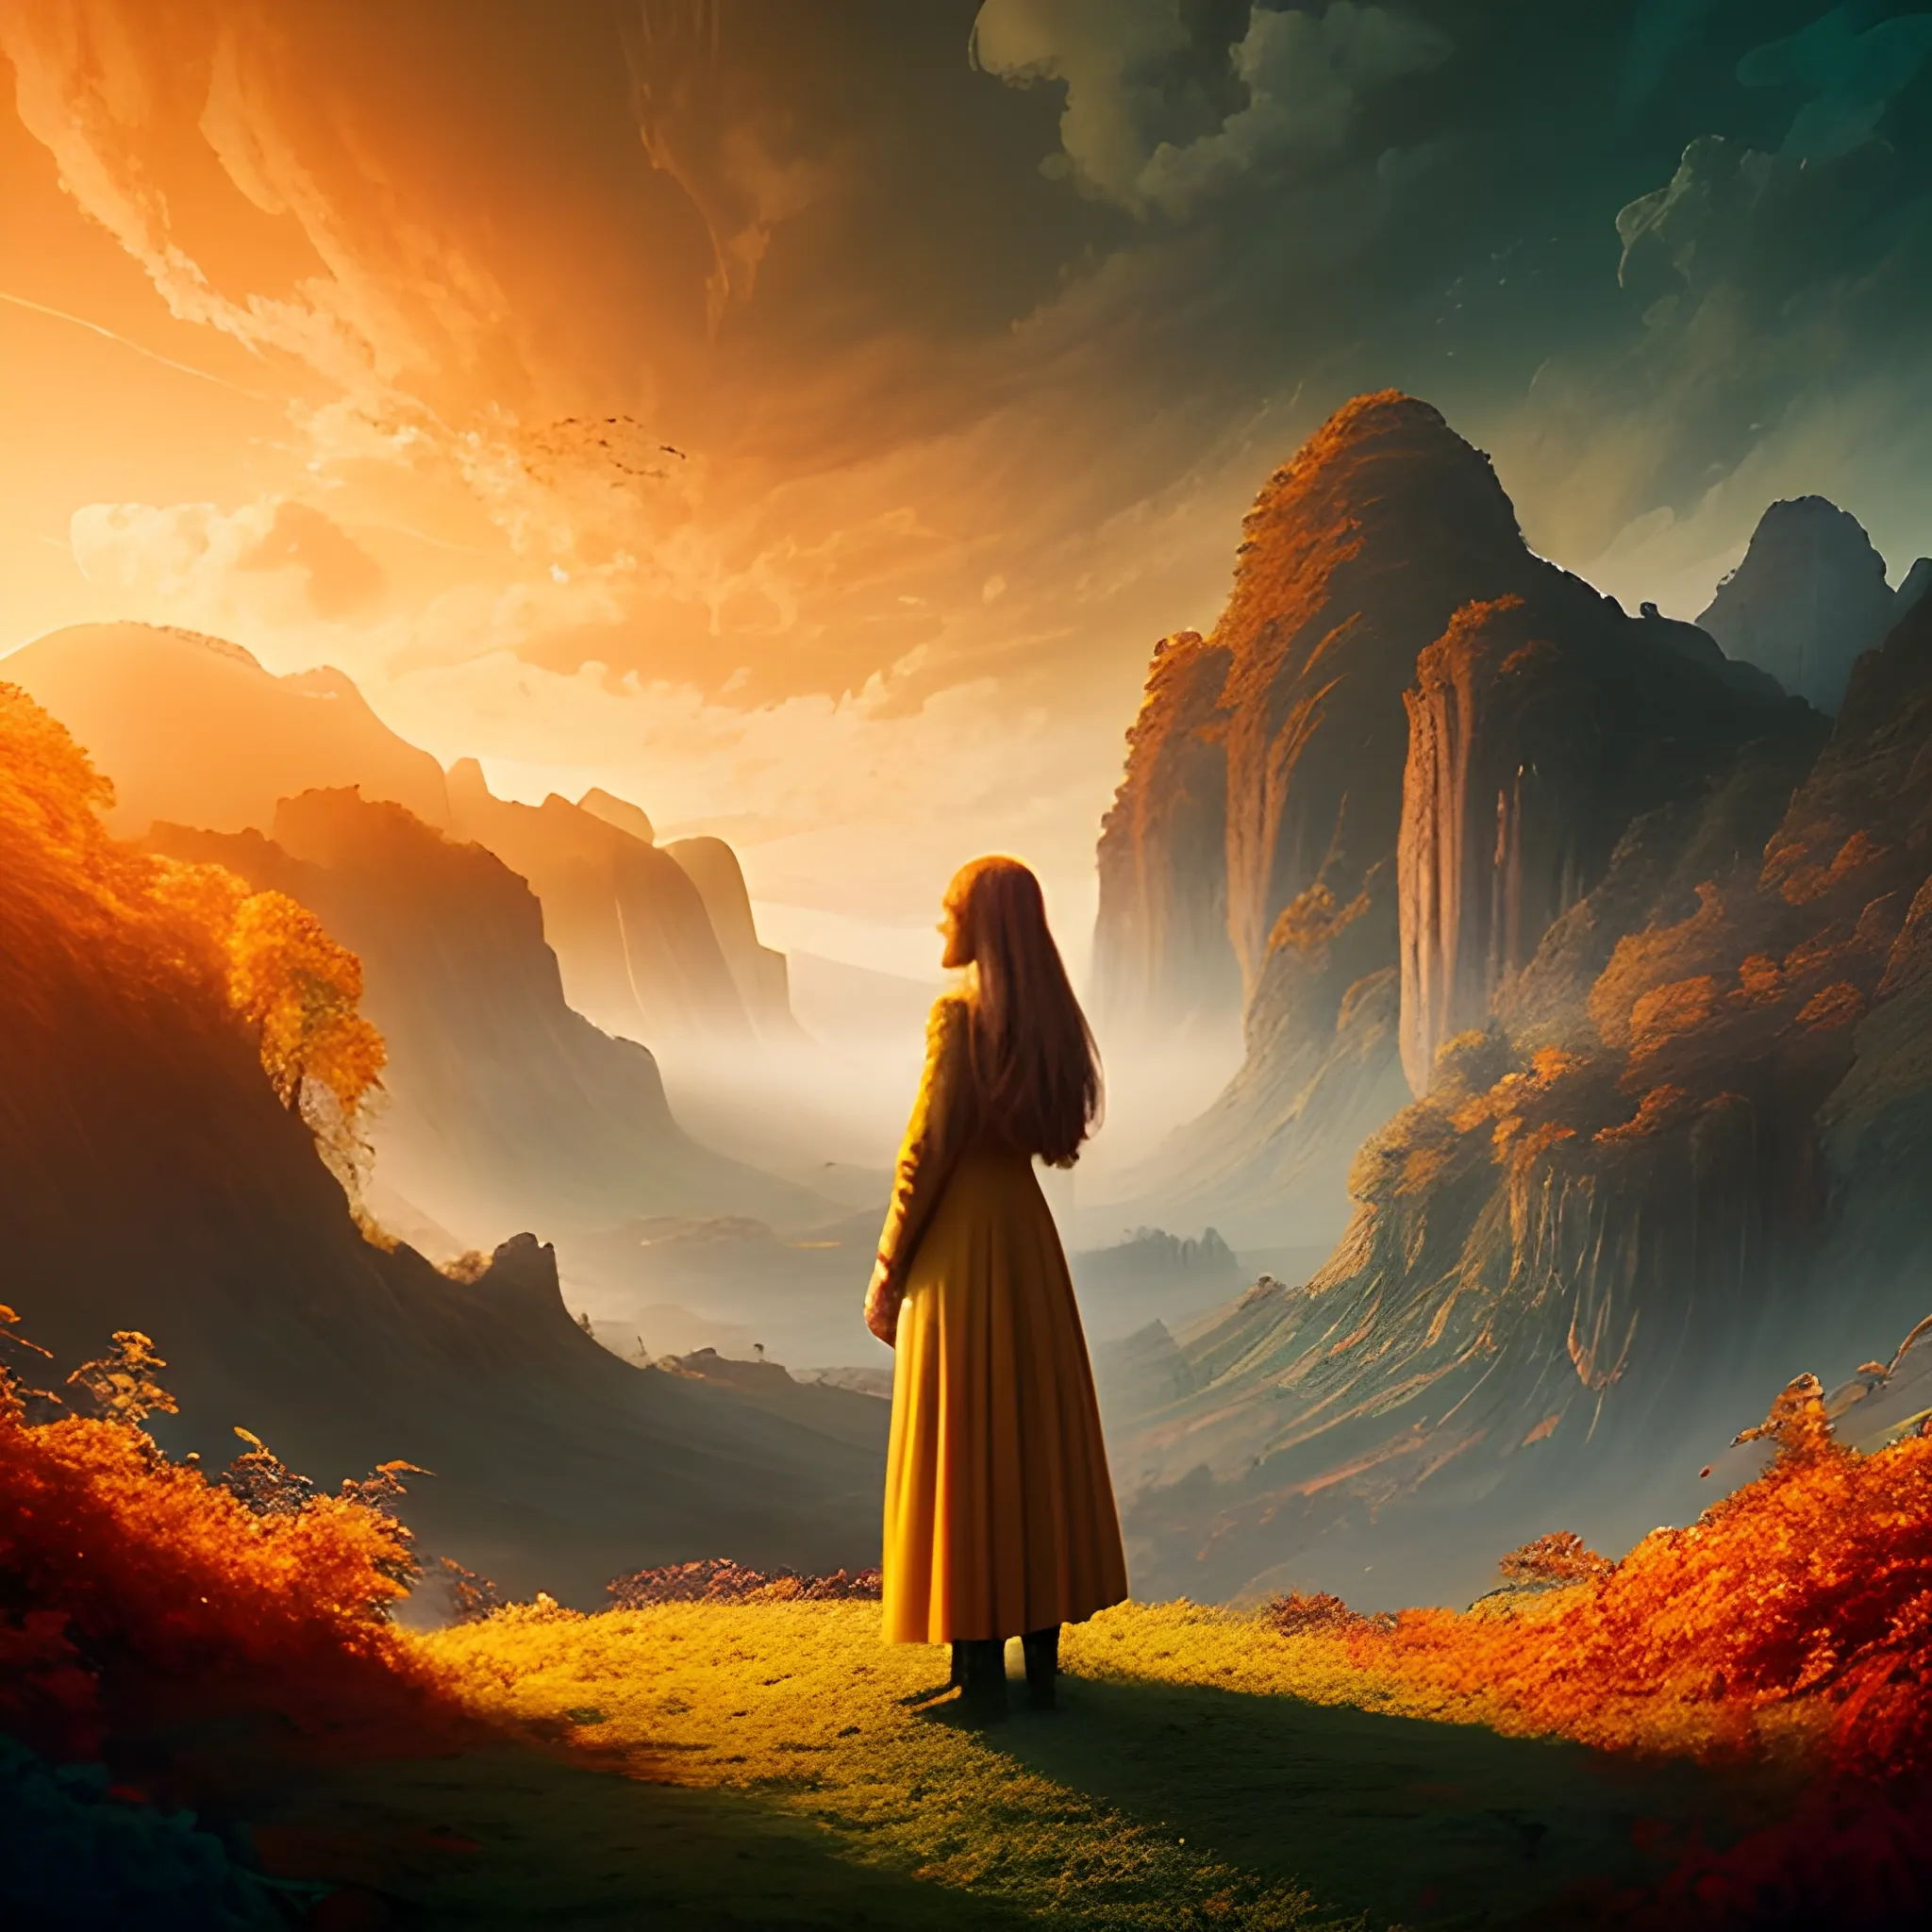 a beautiful landscape photo inspired by arcadia, cinematic atmospheric masterpiece, award winning, hyperdetailed, fantastic, with warm tones of oranges and yellows, wonderful with a mid-aged modern looking woman with mid-long hair looking at this scenary knowing that the future is in her hands.